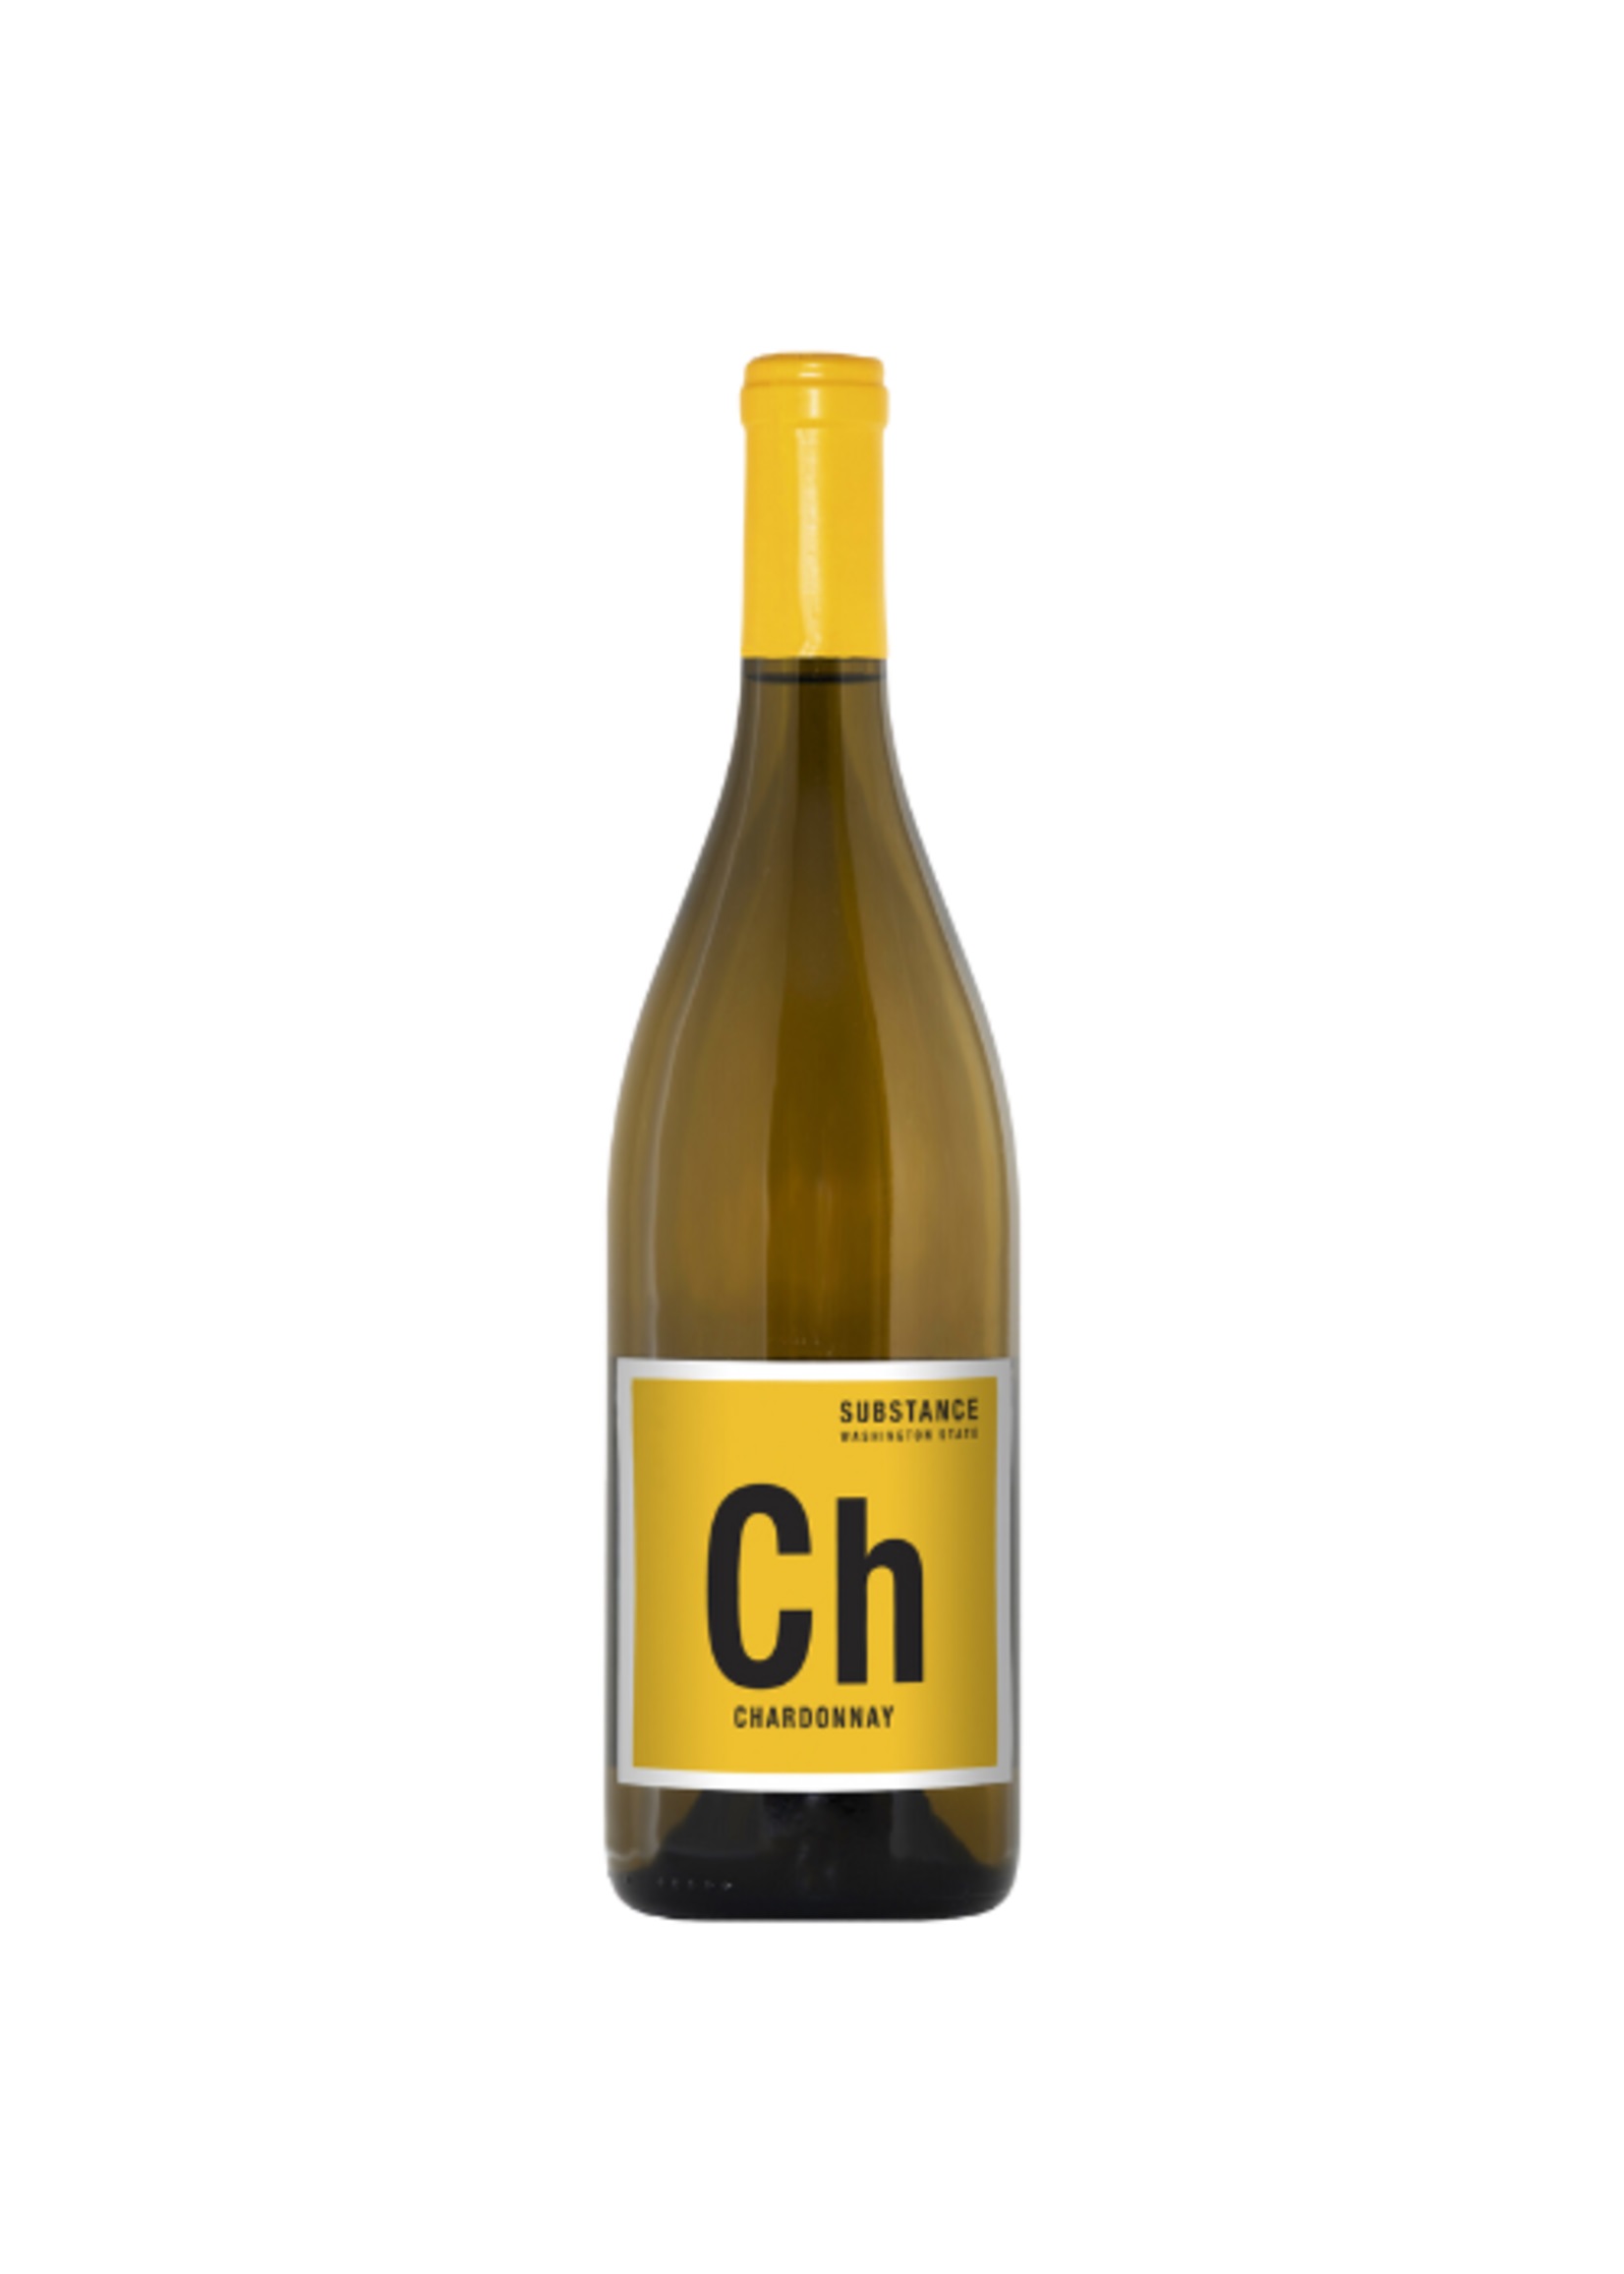 78487 Substance Chardonnay House of Smith 0,75 liter